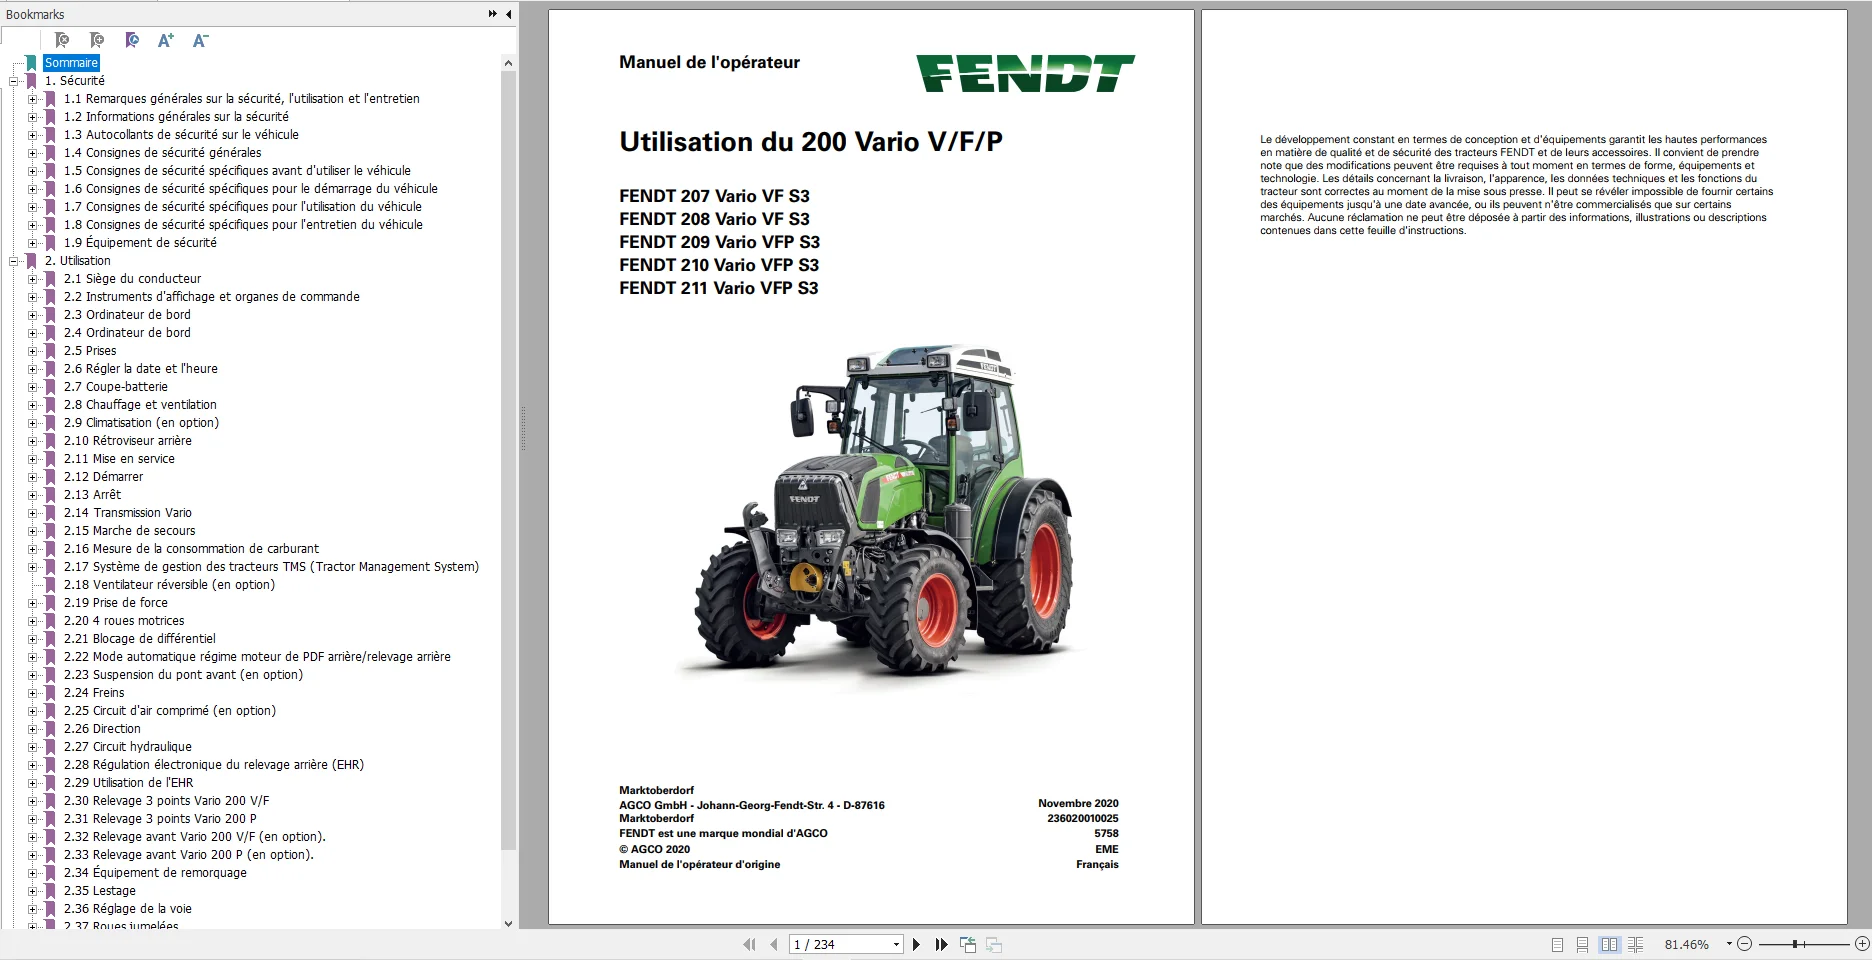 

FENDT TRACTOR 22.3 GB PDF Updated 2022 Diagrams, Operator Manual & Workshop Manuals French DVD